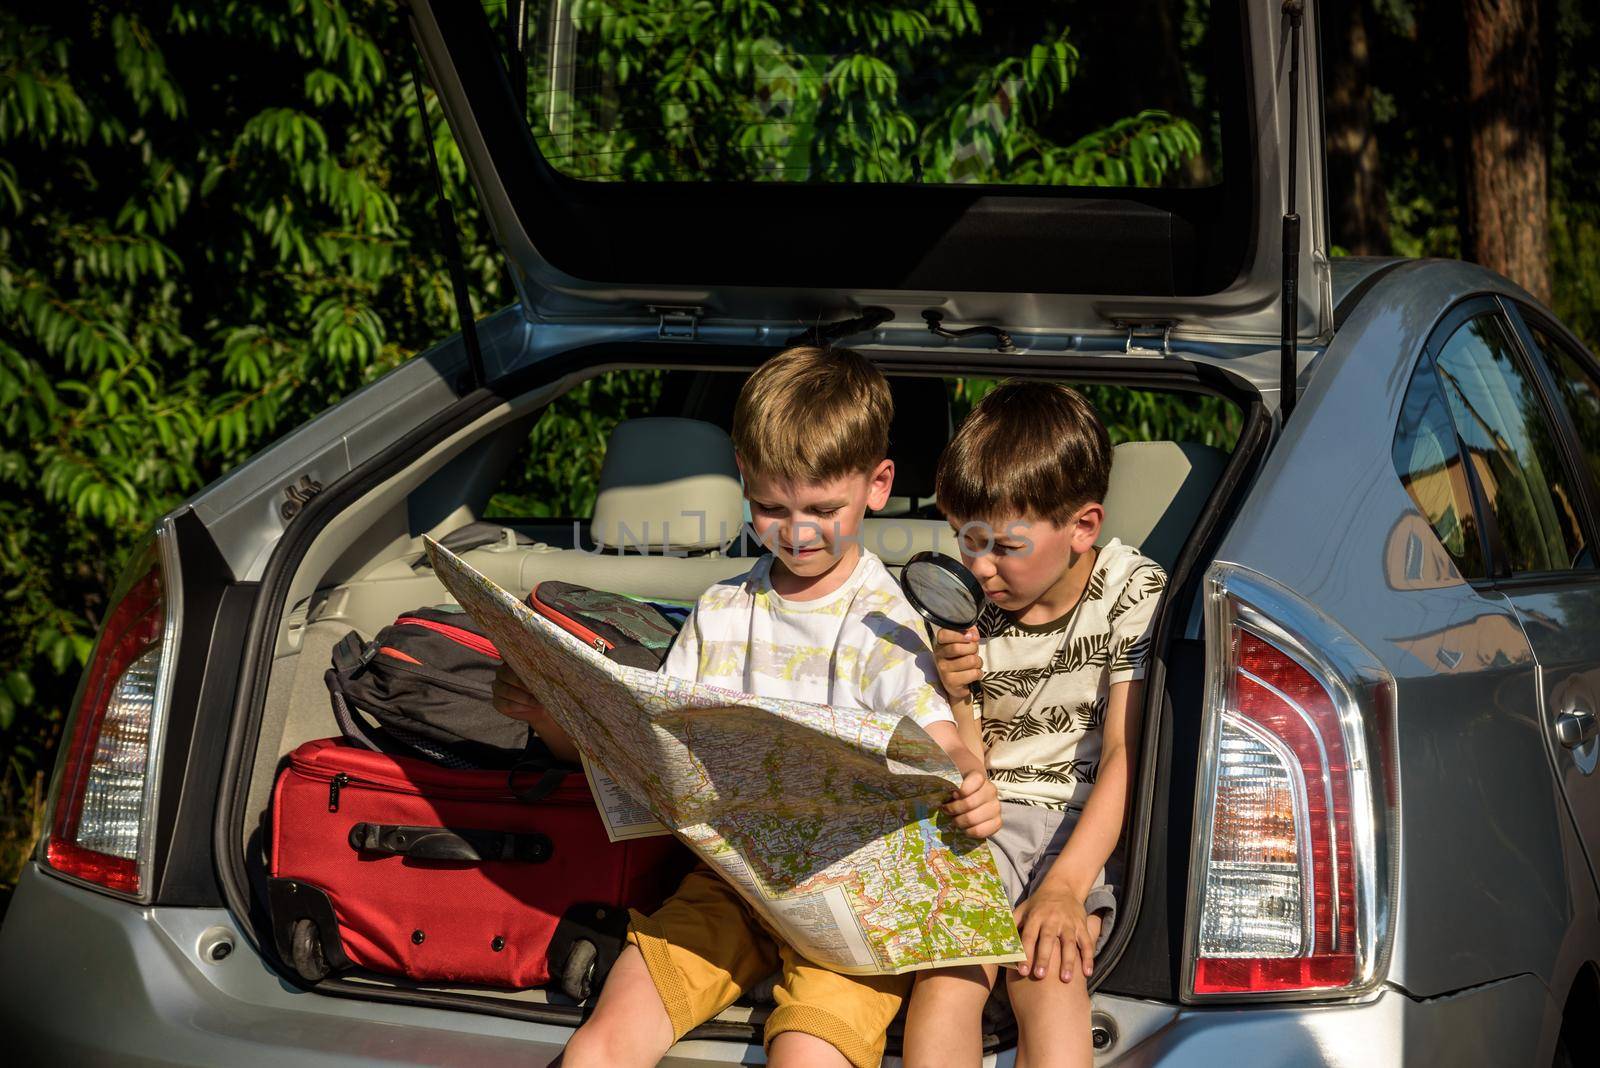 Two cute boys sitting in a car trunk before going on vacations with their parents. Kids sitting in a car examining a map. Summer break at school. Family travel by car by Kobysh